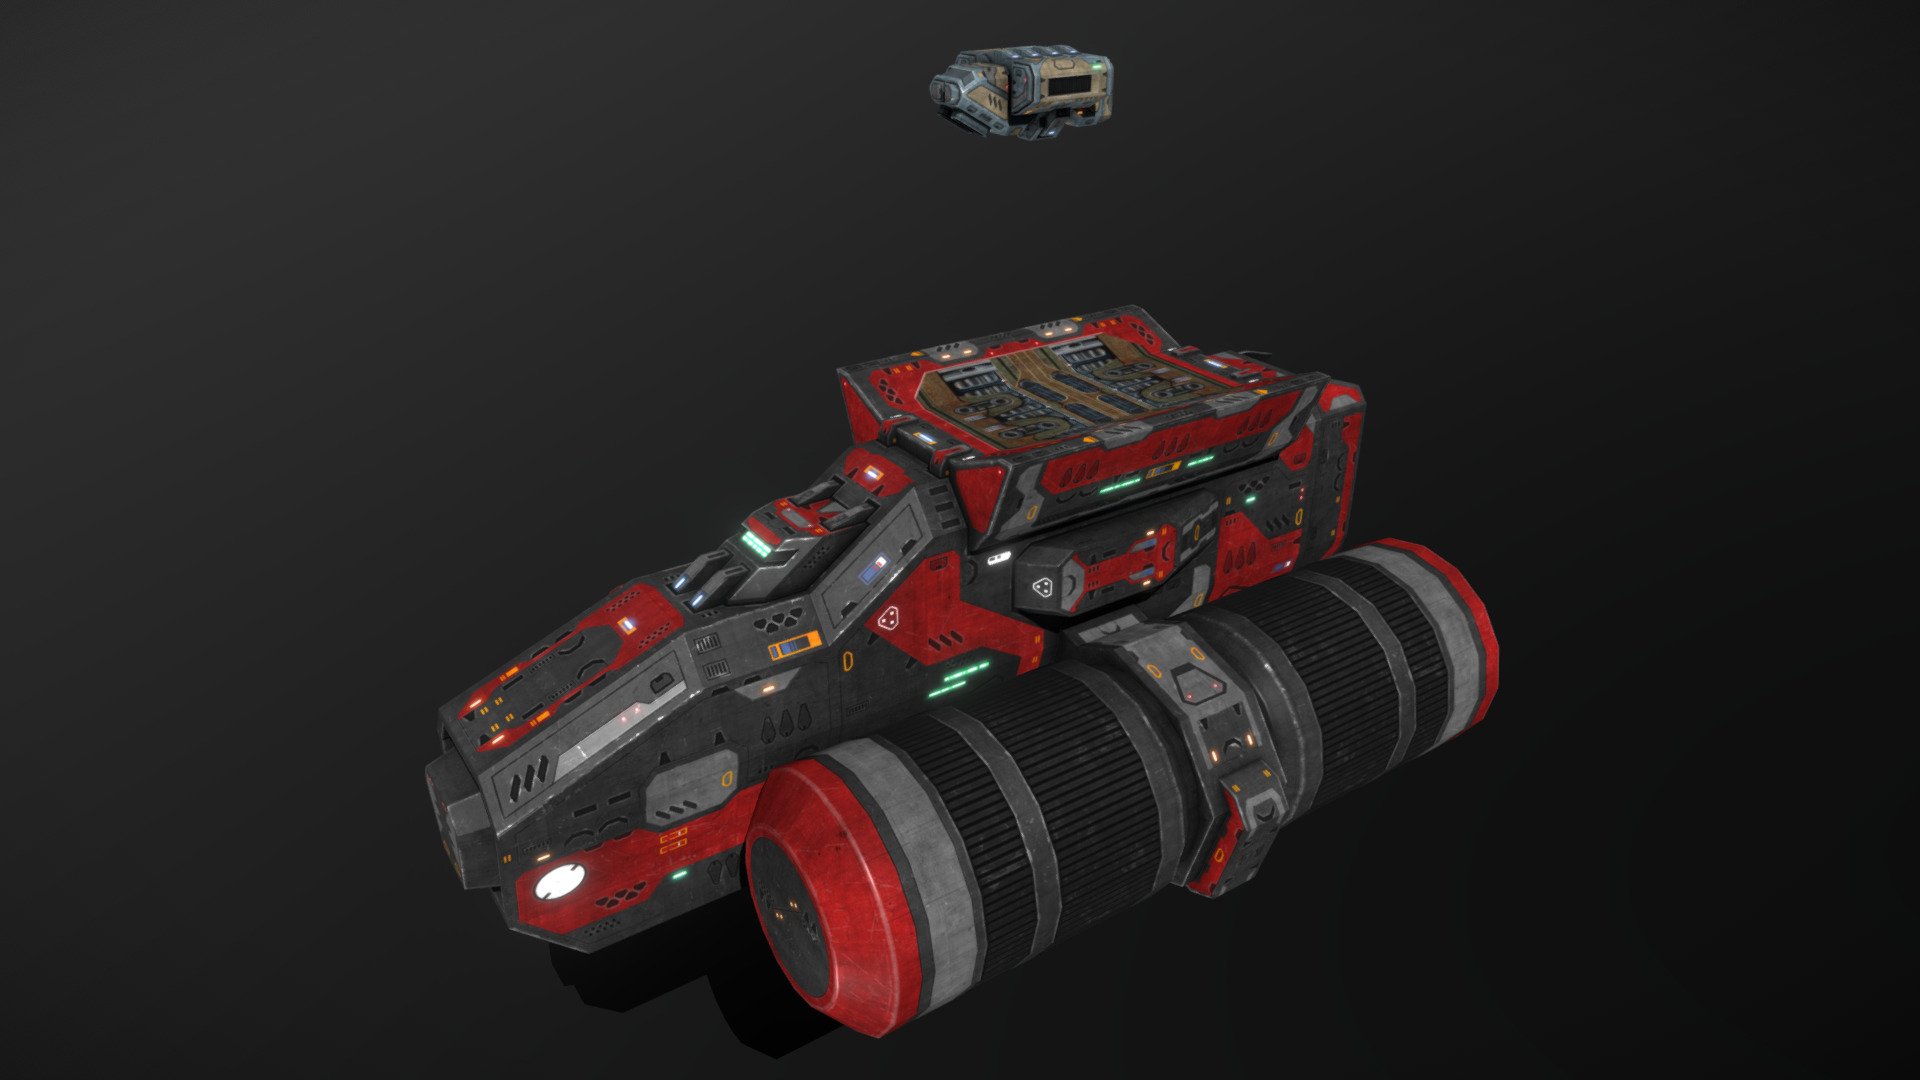 This is a model of a low-poly and game-ready scifi spaceship. 

The weapons are separate meshes and can be animated with a keyframe animation tool. The weapon loadout can be changed too.

The model comes with several differently colored texture sets. The PSD file with intact layers is included.

Please note: The textures in the Sketchfab viewer have a reduced resolution to improve Sketchfab loading speed.

If you have purchased this model please make sure to download the “additional file”.  It contains FBX and OBJ meshes, full resolution textures and the source PSDs with intact layers. The meshes are separate and can be animated (e.g. firing animations for gun barrels, rotating turrets, etc) 3d model